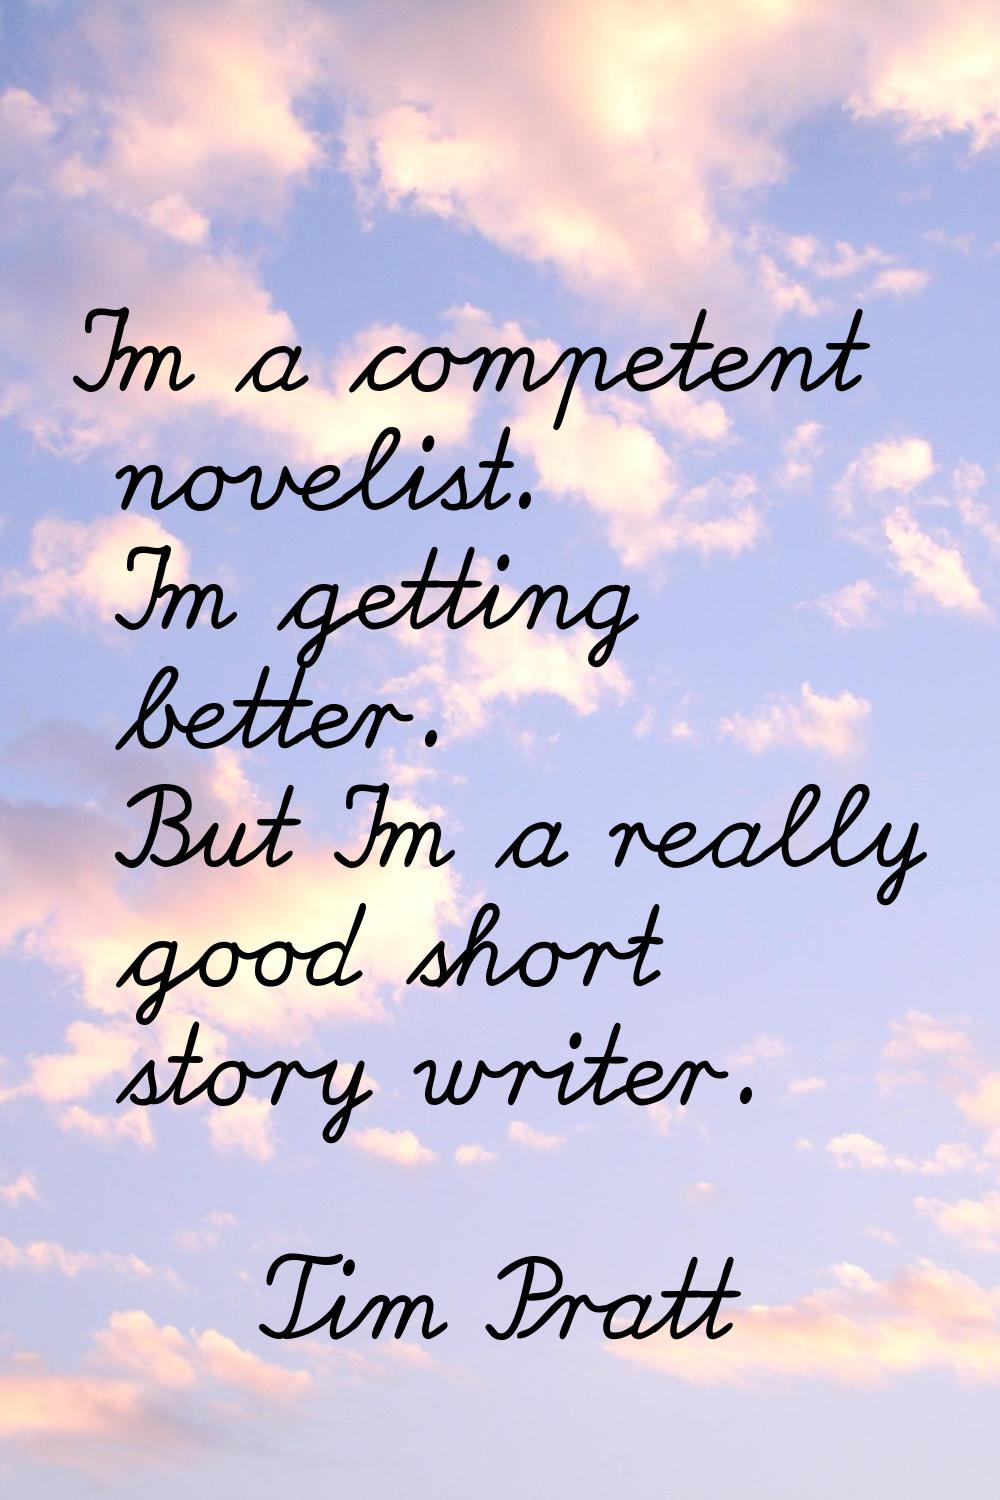 I'm a competent novelist. I'm getting better. But I'm a really good short story writer.